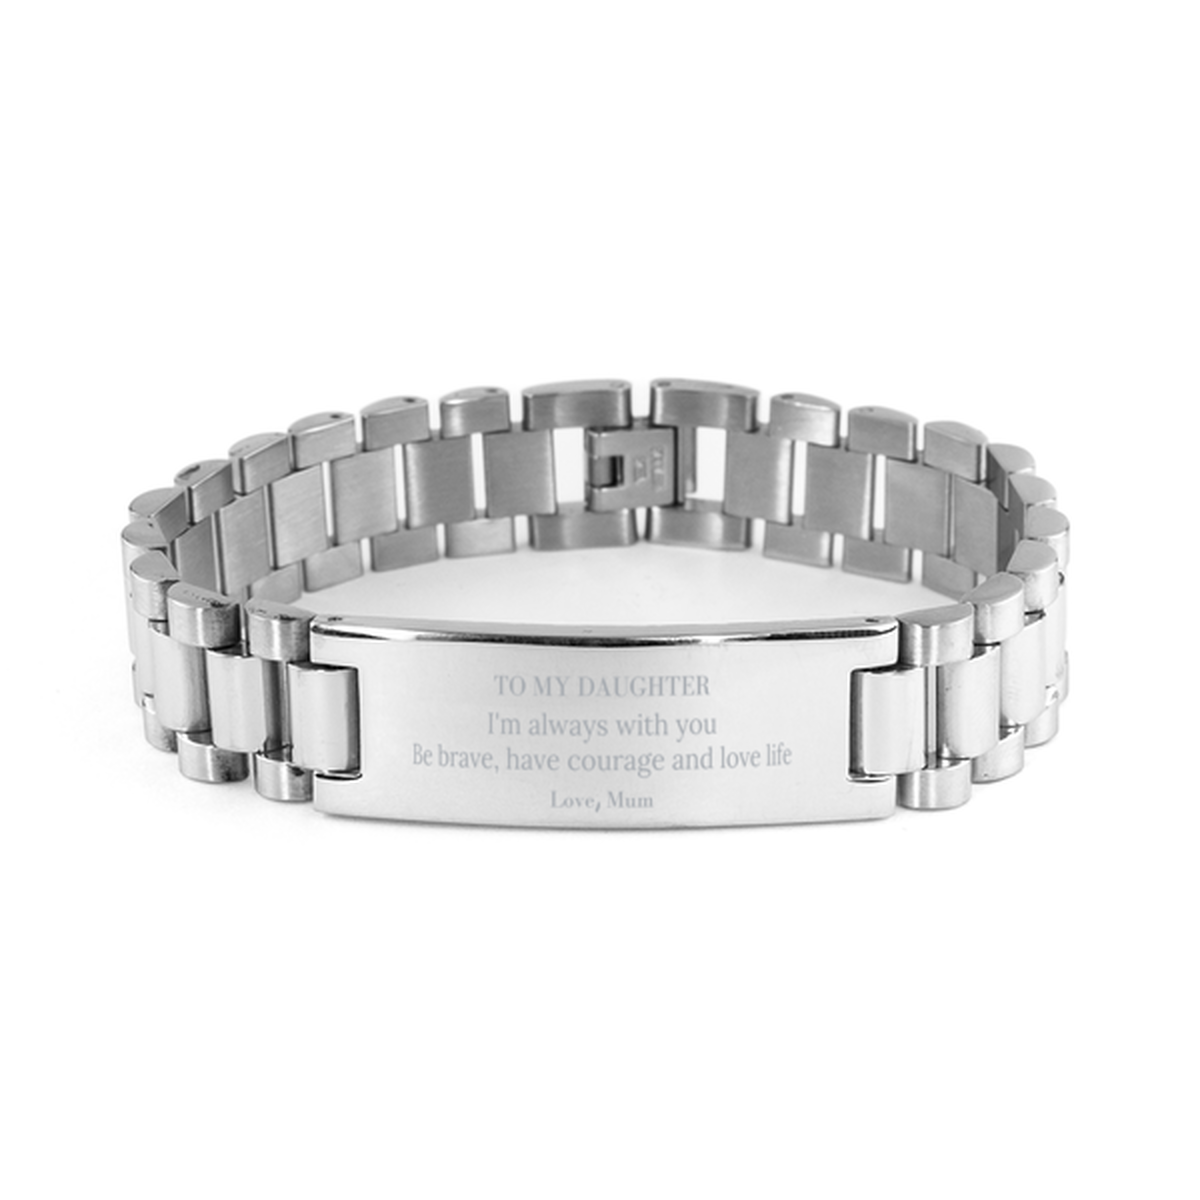 To My Daughter Gifts from Mum, Unique Ladder Stainless Steel Bracelet Inspirational Christmas Birthday Graduation Gifts for Daughter I'm always with you. Be brave, have courage and love life. Love, Mum